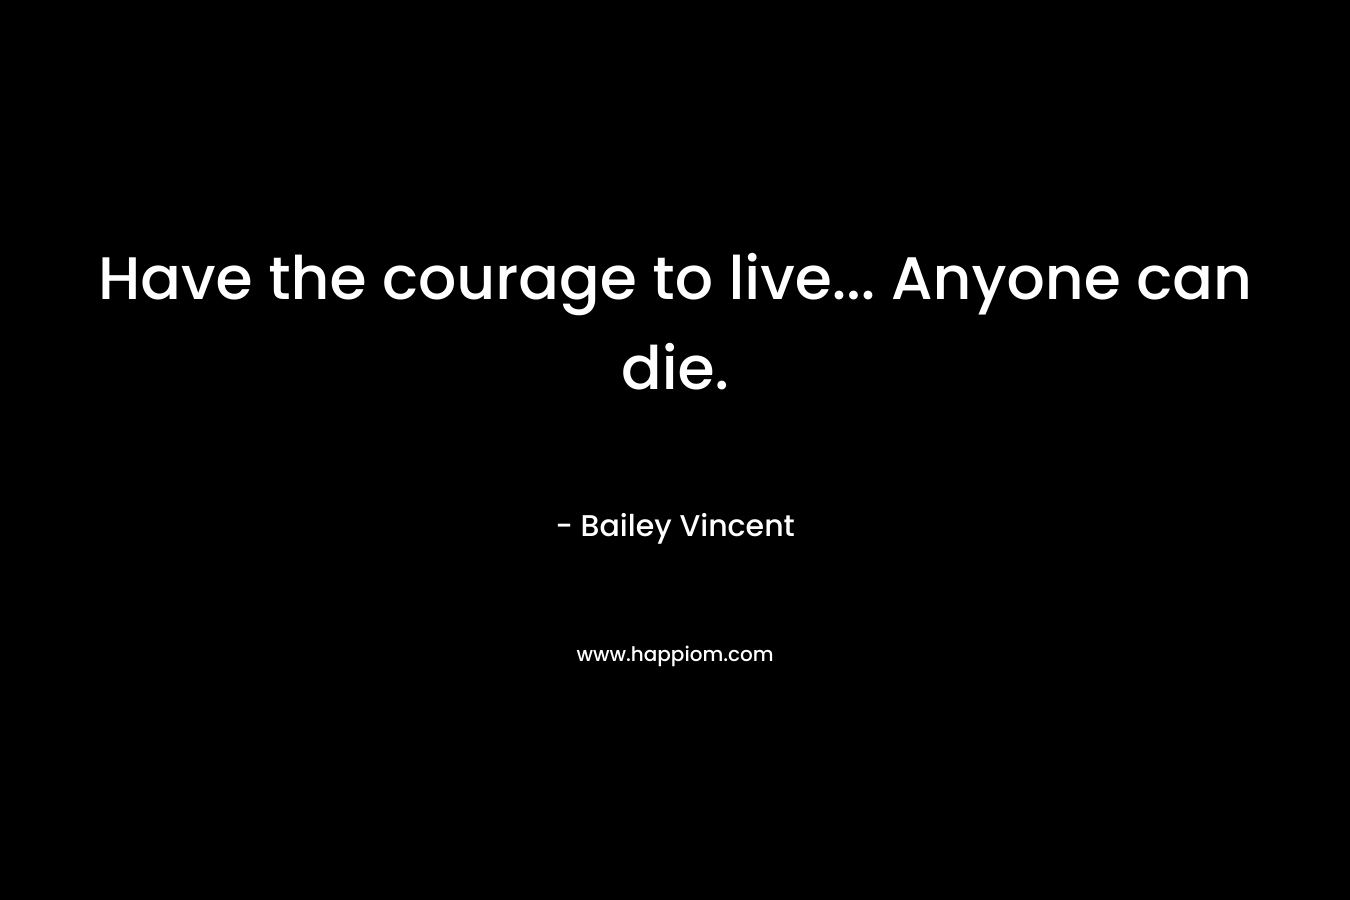 Have the courage to live... Anyone can die.